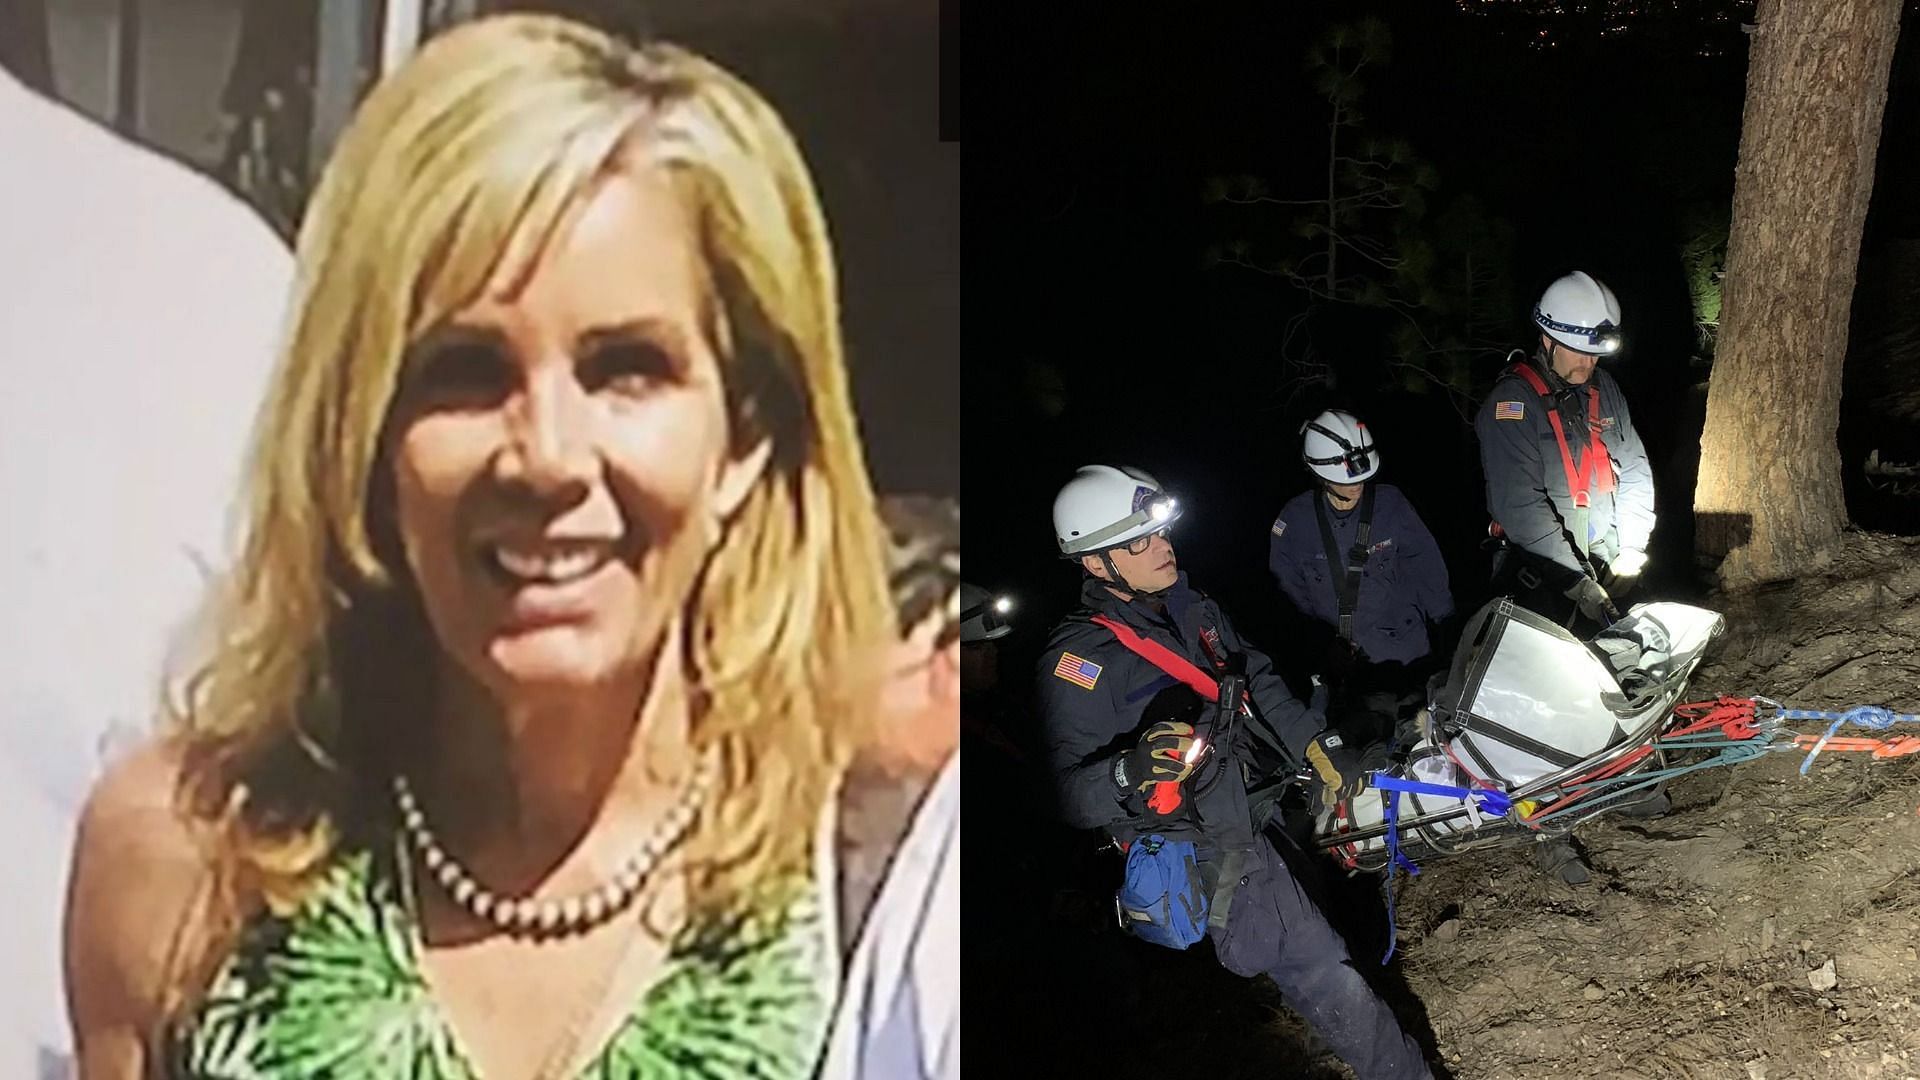 Nevada woman Gayle Stewart has been reported missing since March 14 (Image via Reno Fire Department)